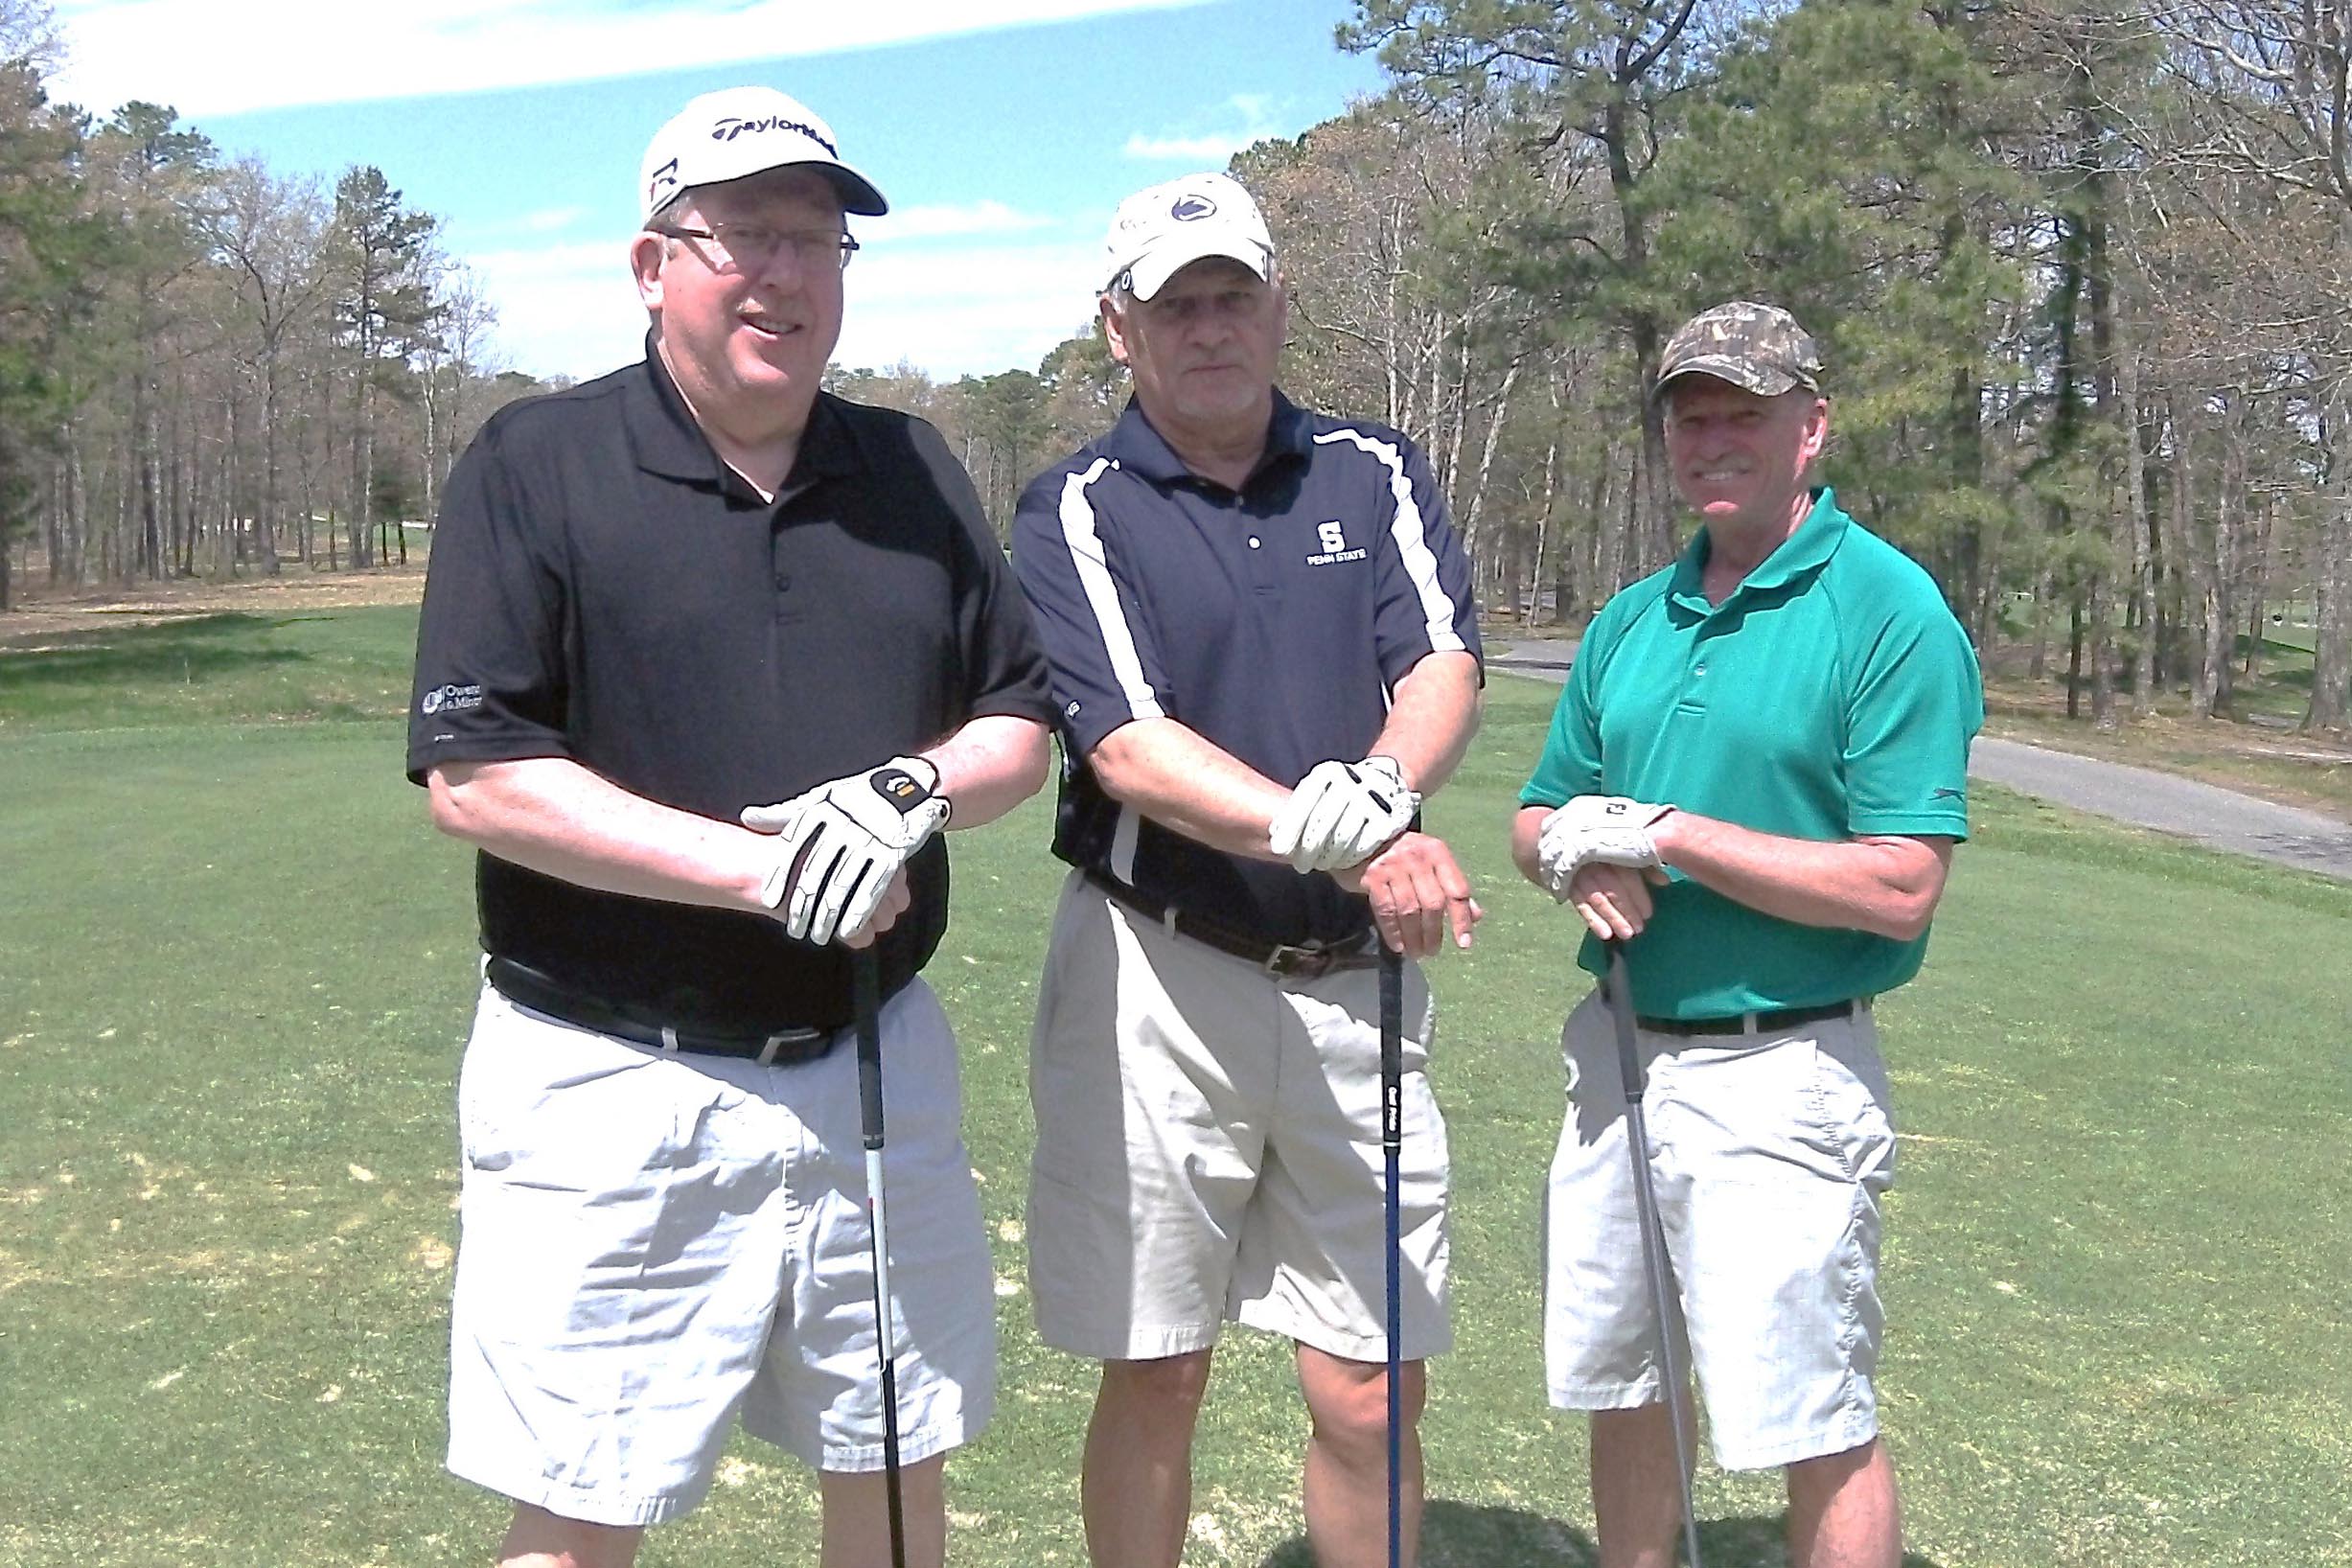  L to R: Victor Howe, John Wszalek and Hunter at the 2014 Theta Chi Golf Open, May 2, 2014 